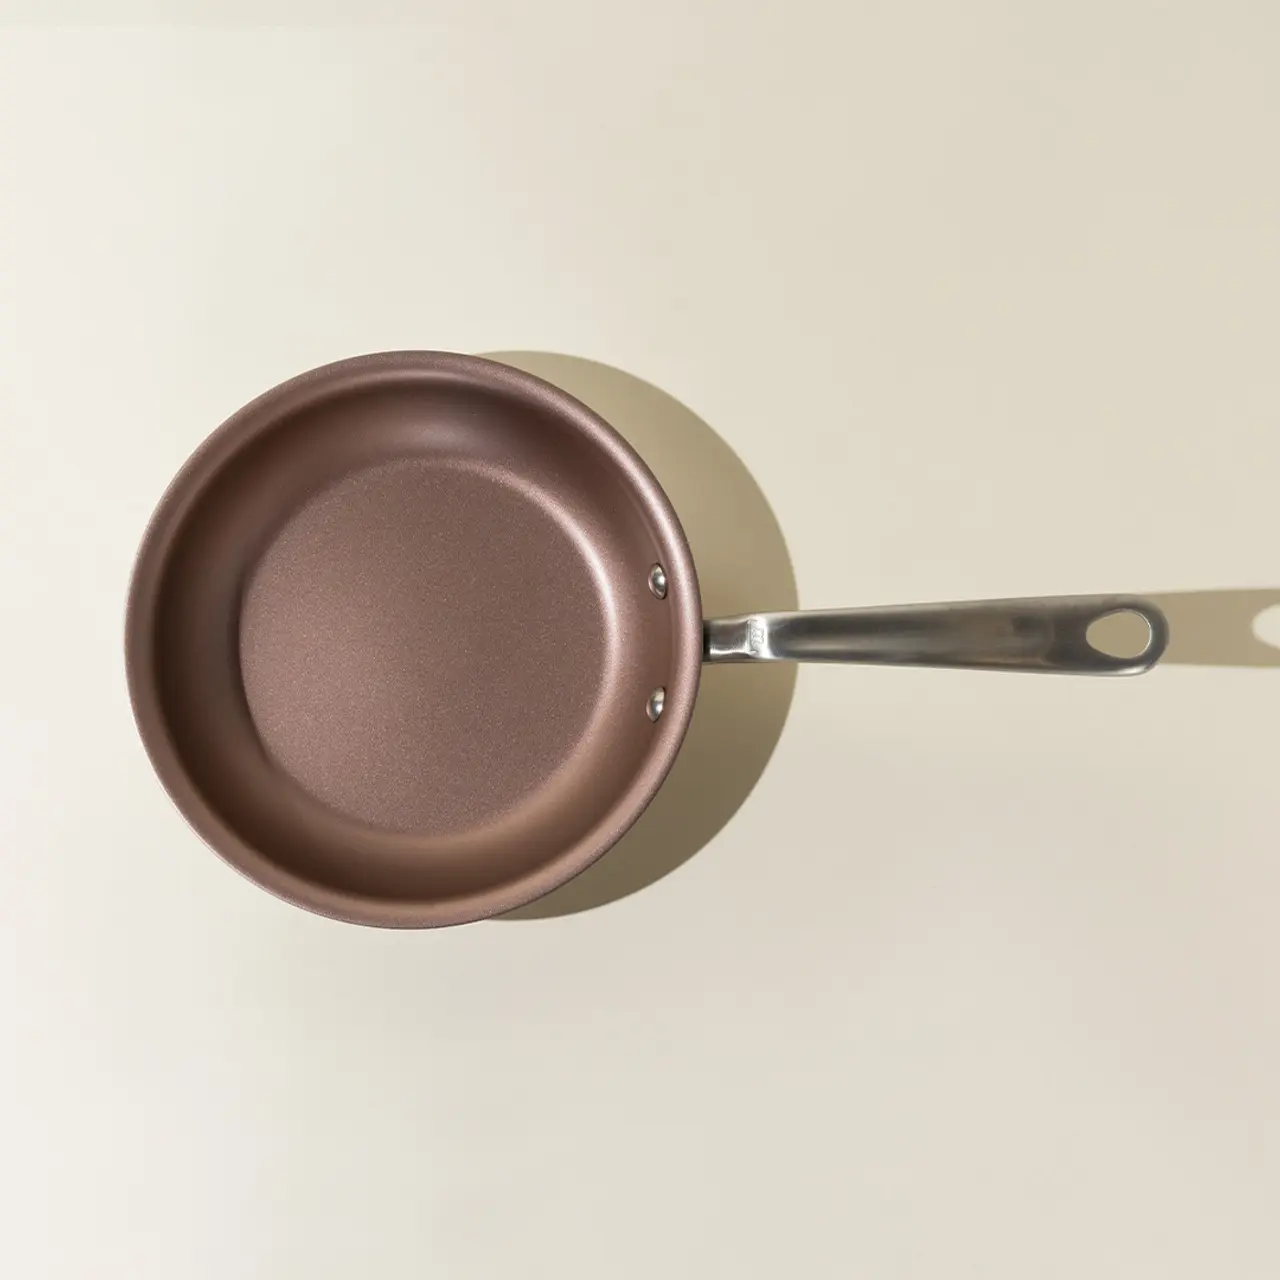 A brown non-stick frying pan with a silver handle is shown from a top-down perspective.